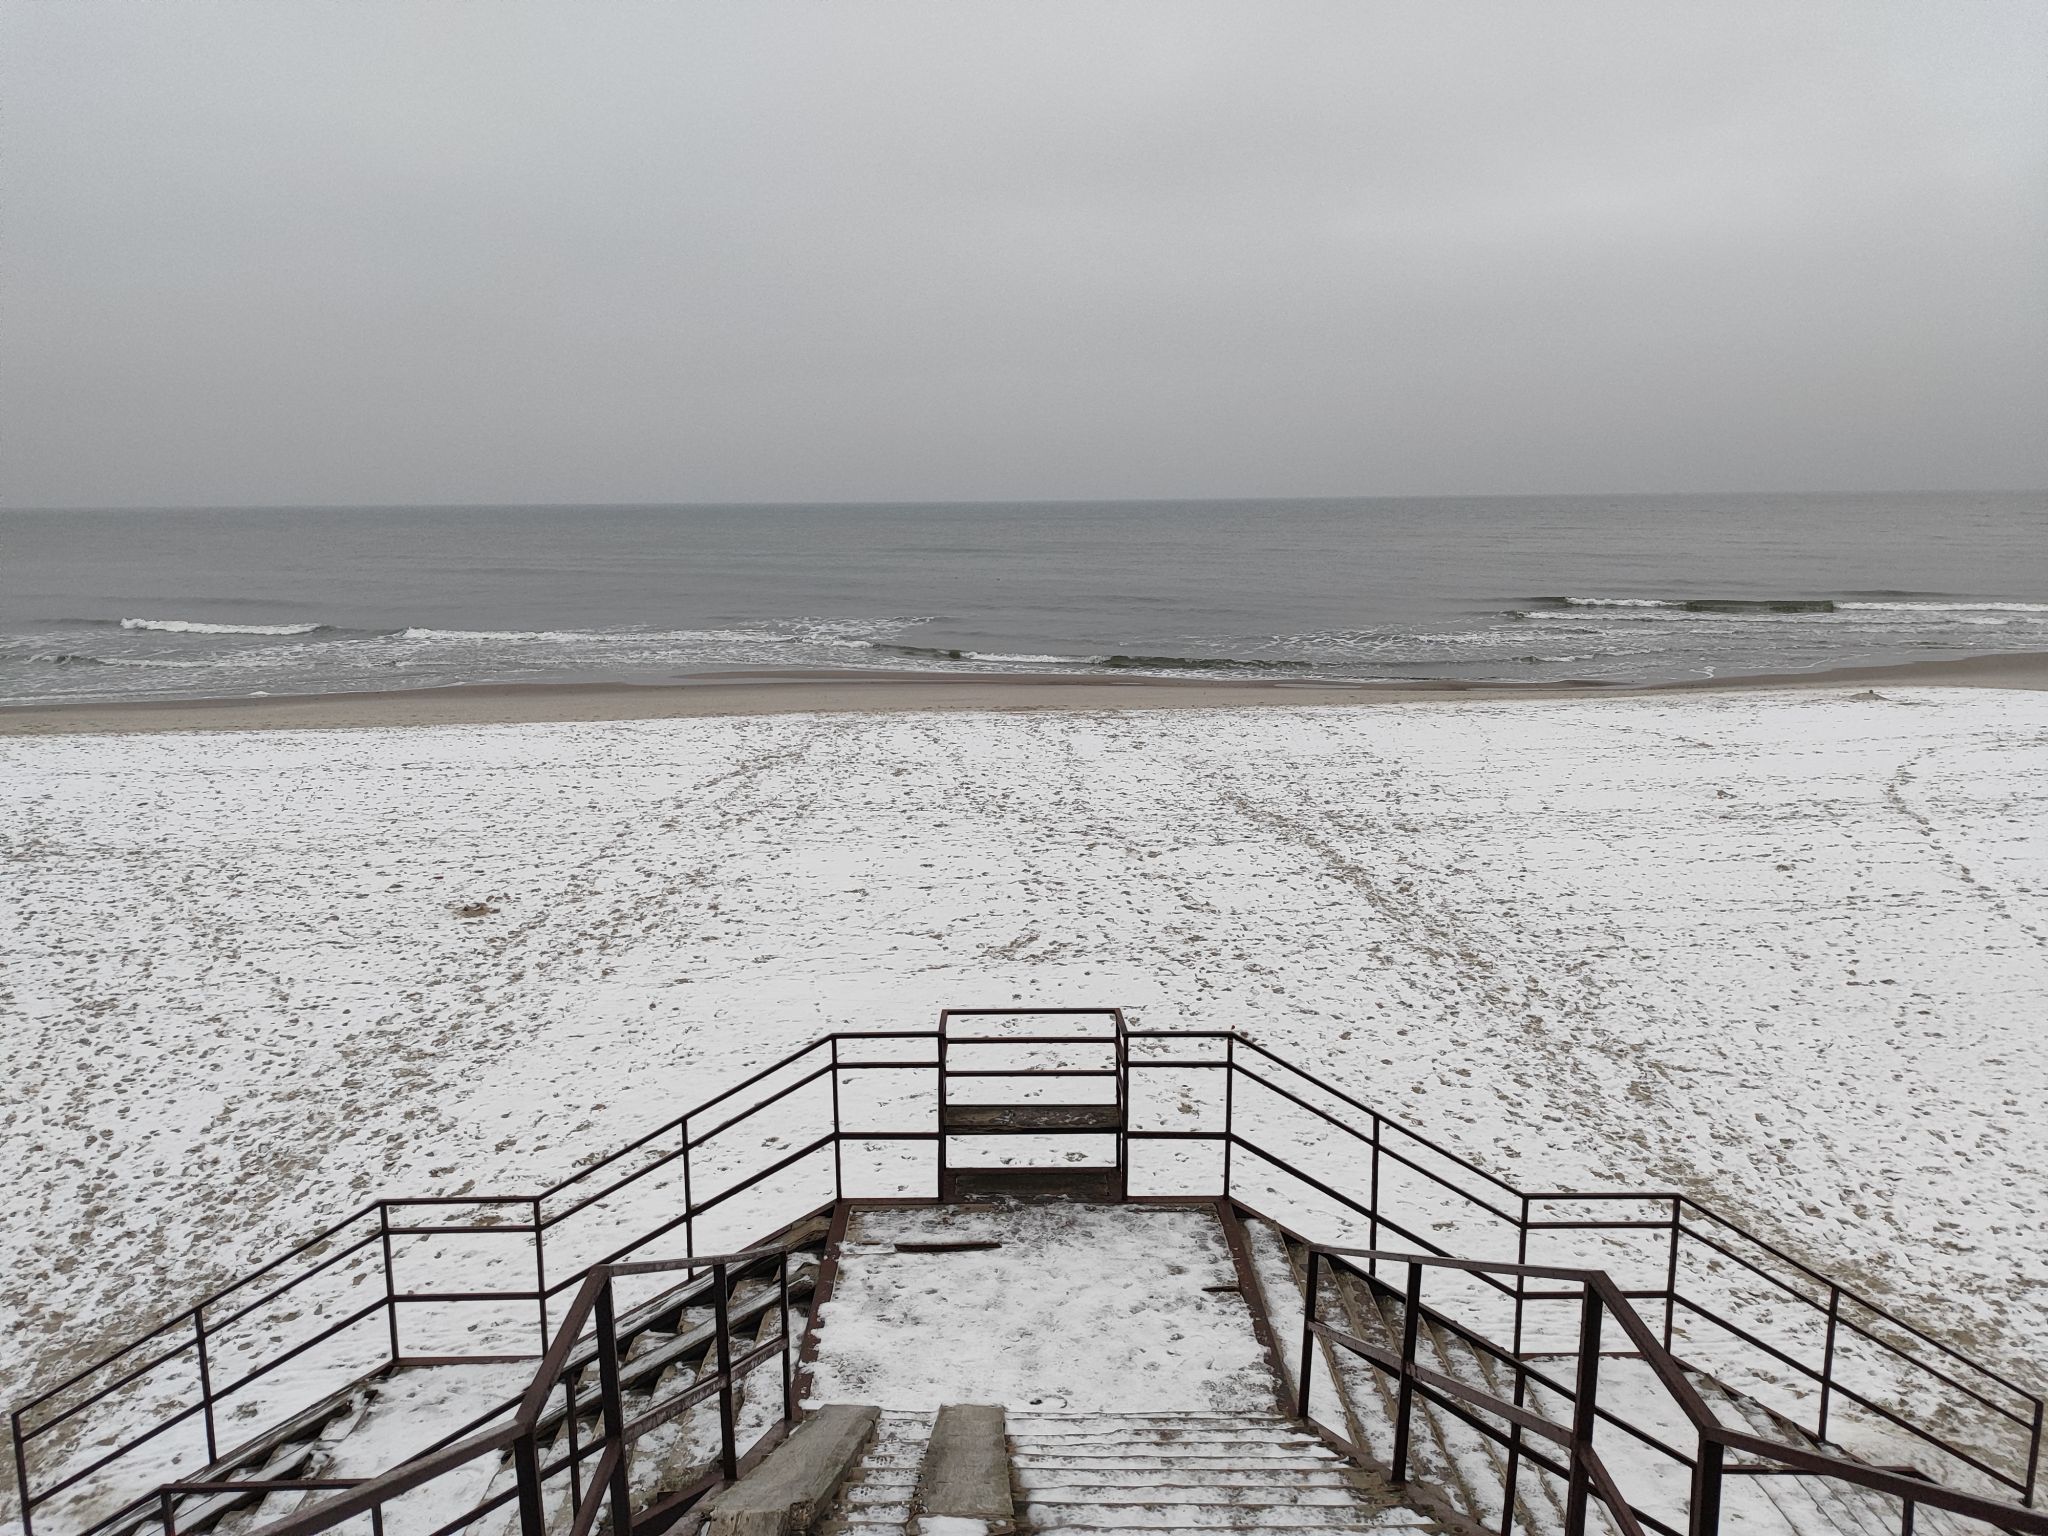 A view of sea and the beach as visible from the top of the stairs. Stairs and part of the beach are covered in snow.